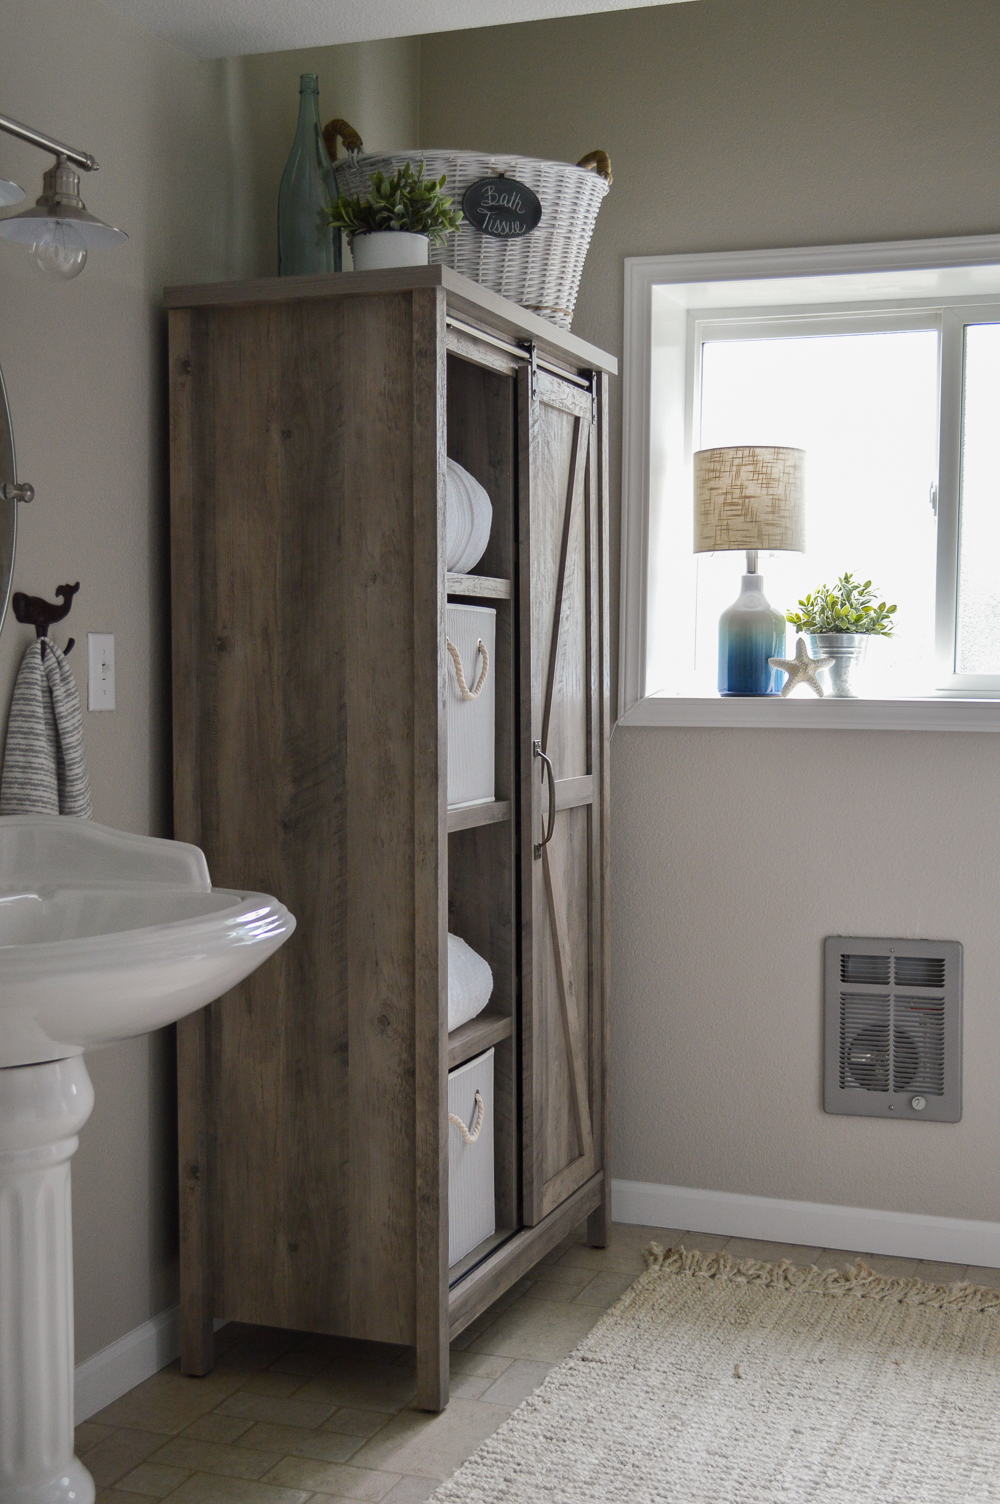 The Little Cottage Bathroom Makeover at Fox Hollow Cottage - Coastal cottage farmhouse blend with Better Homes & Gardens 